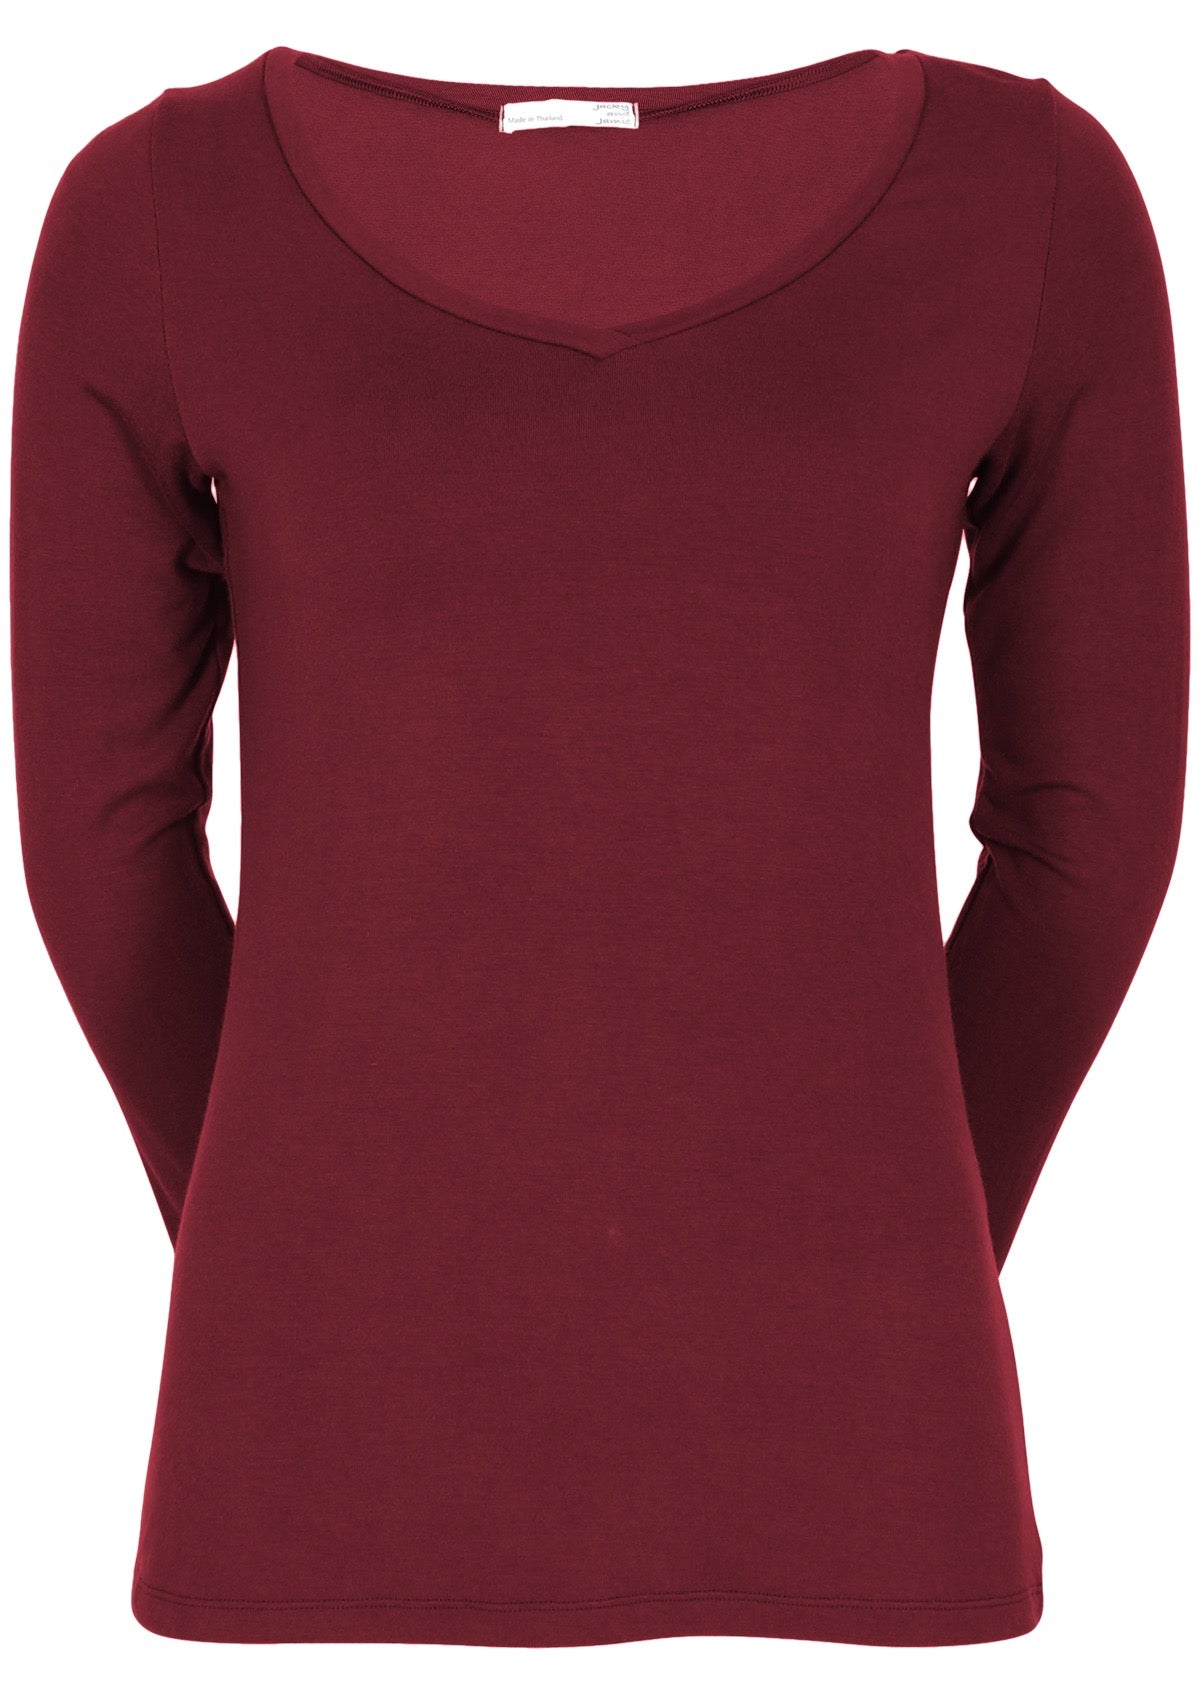 Front view of women's maroon long sleeve stretch v-neck soft rayon top.